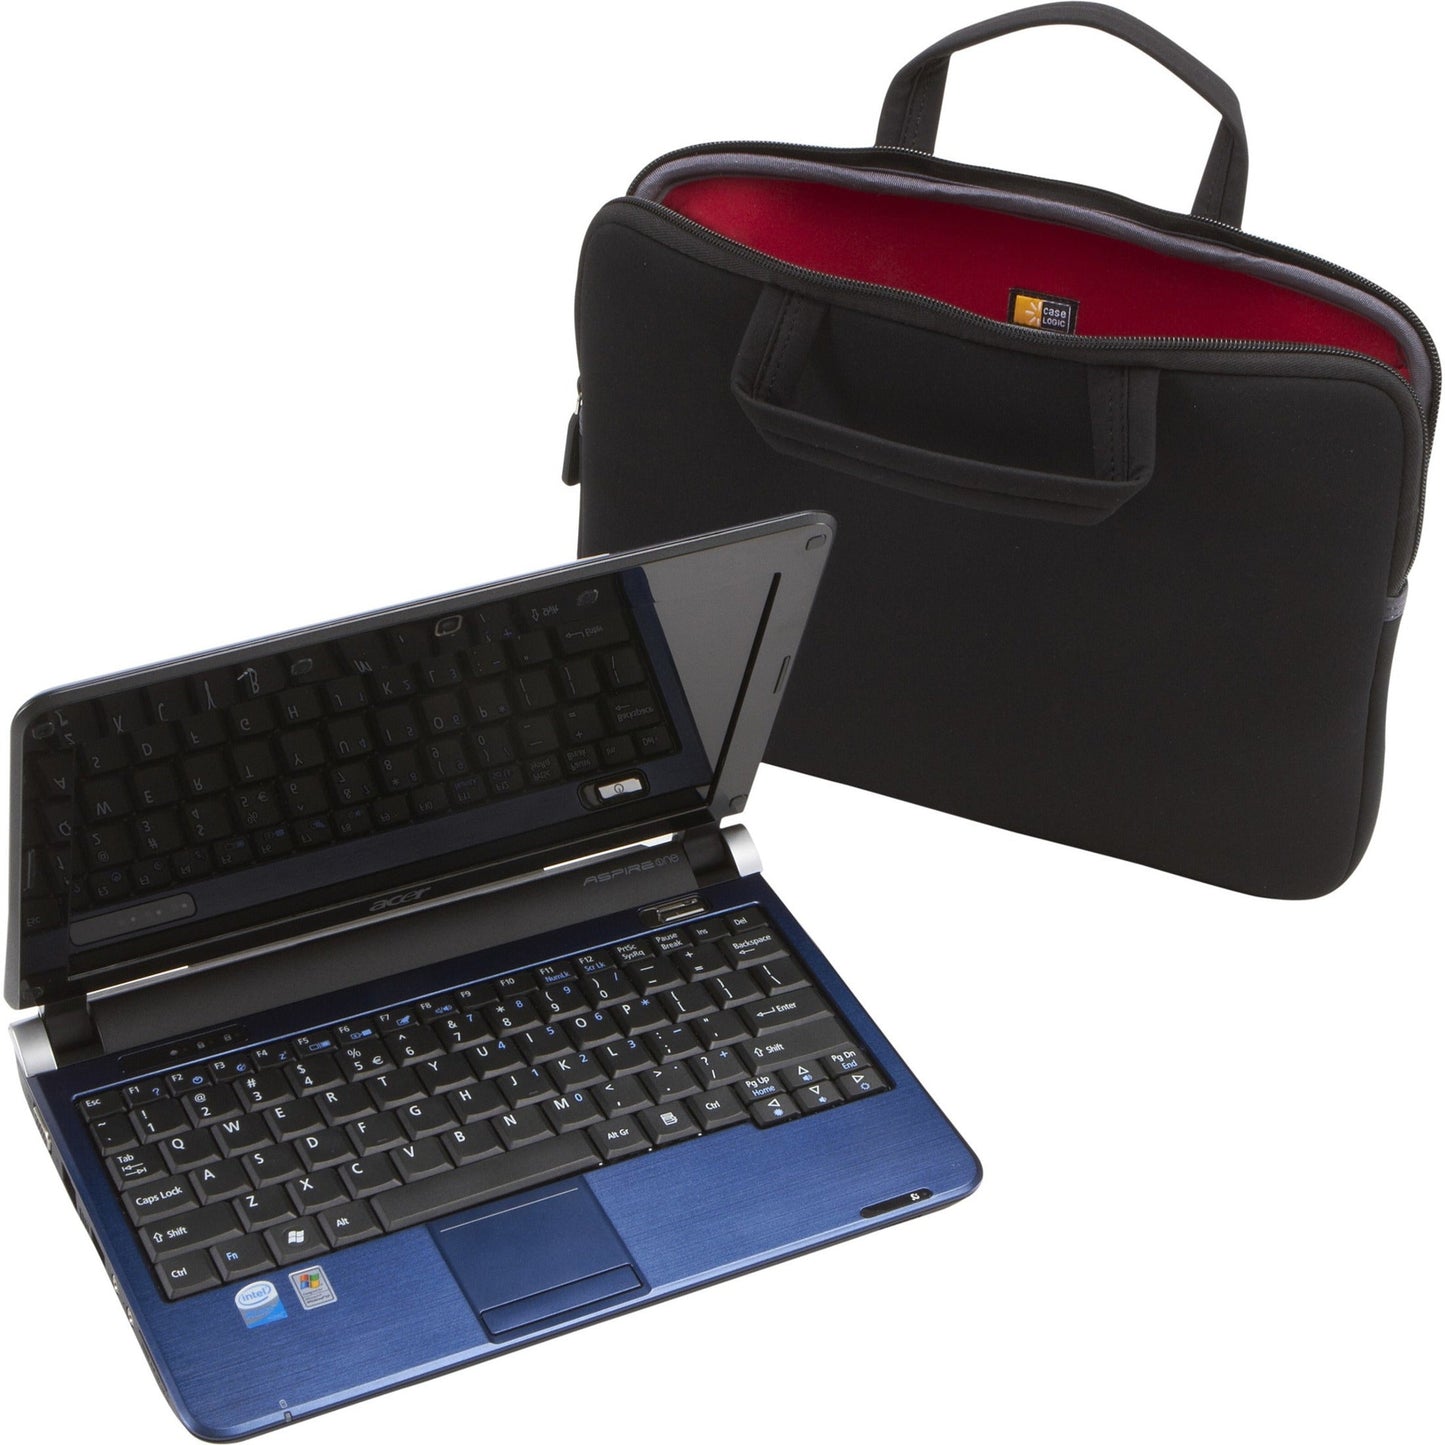 Case Logic PAS-215 Carrying Case (Sleeve) for 15" MacBook Pro Notebook Cord Accessories USB Drive - Black